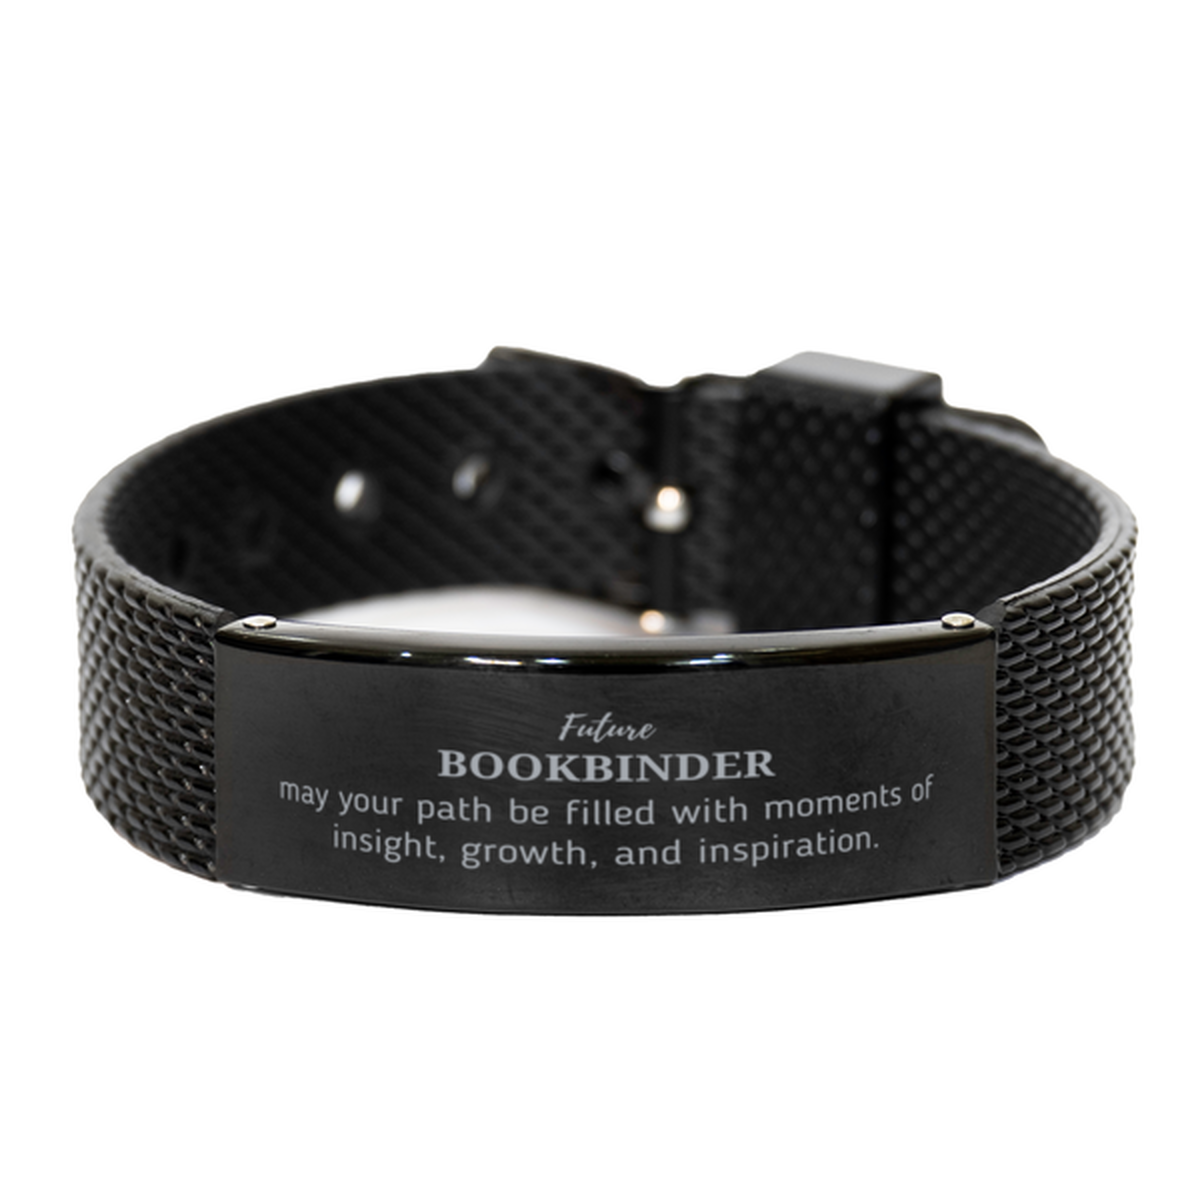 Future Bookbinder Gifts, May your path be filled with moments of insight, Graduation Gifts for New Bookbinder, Christmas Unique Black Shark Mesh Bracelet For Men, Women, Friends